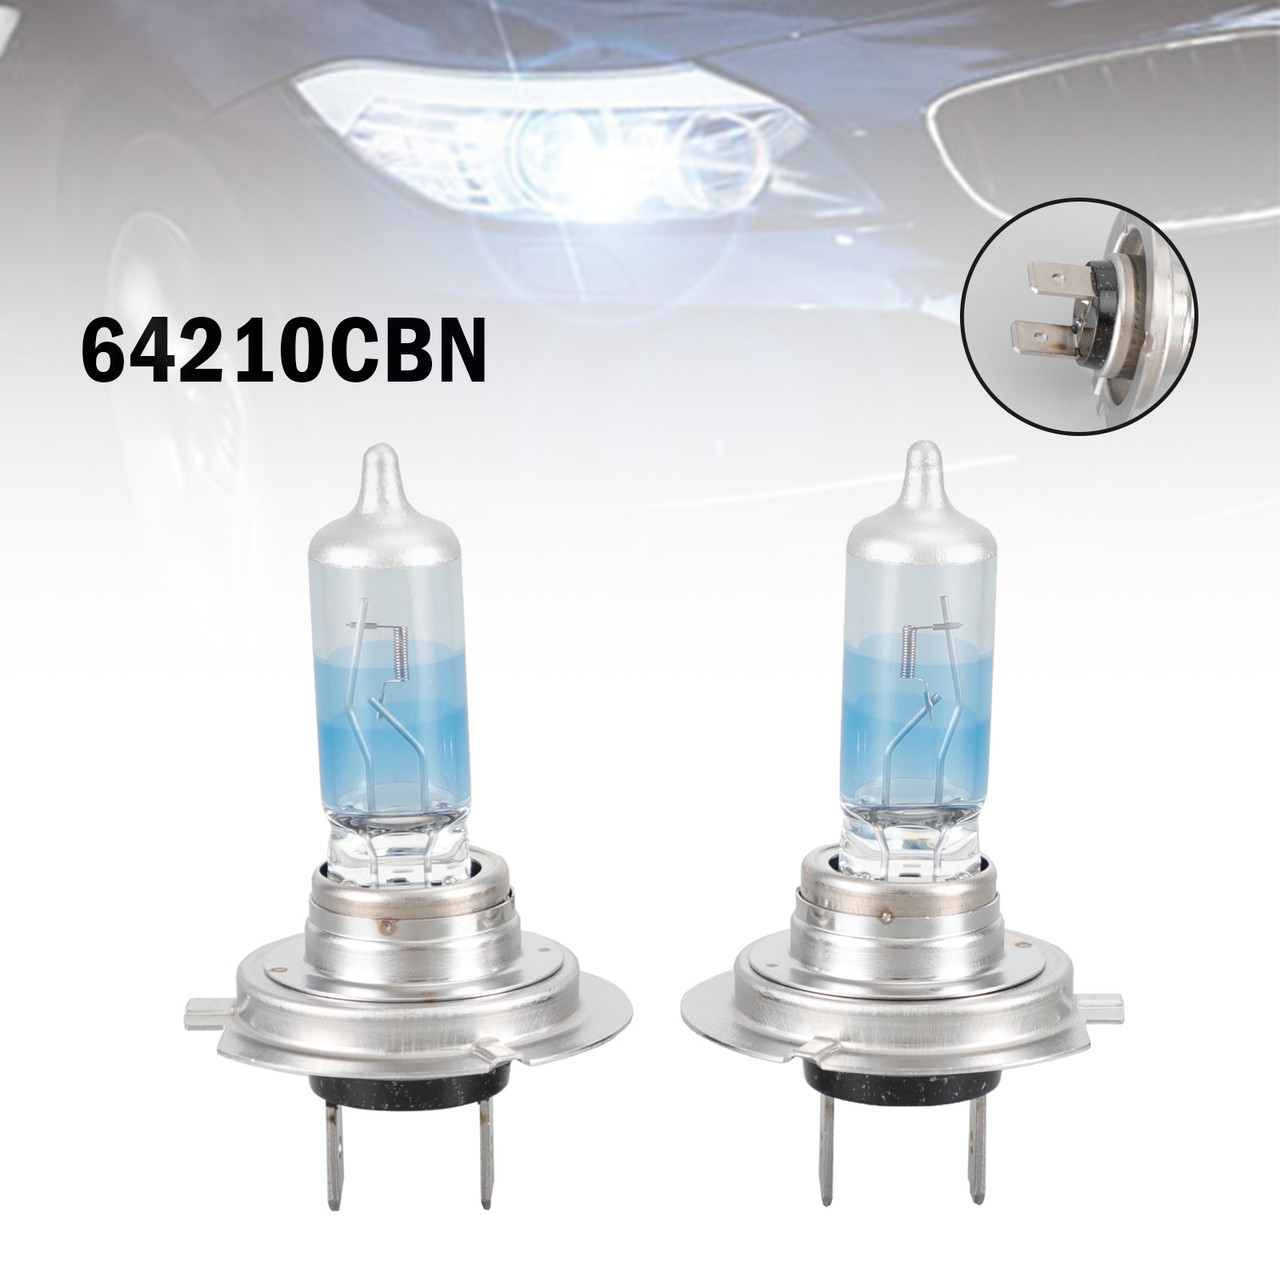 For OSRAM Car COOL BULE INTENSE 64210CBN H7 12V55W PX26d Up to 5000K +100%